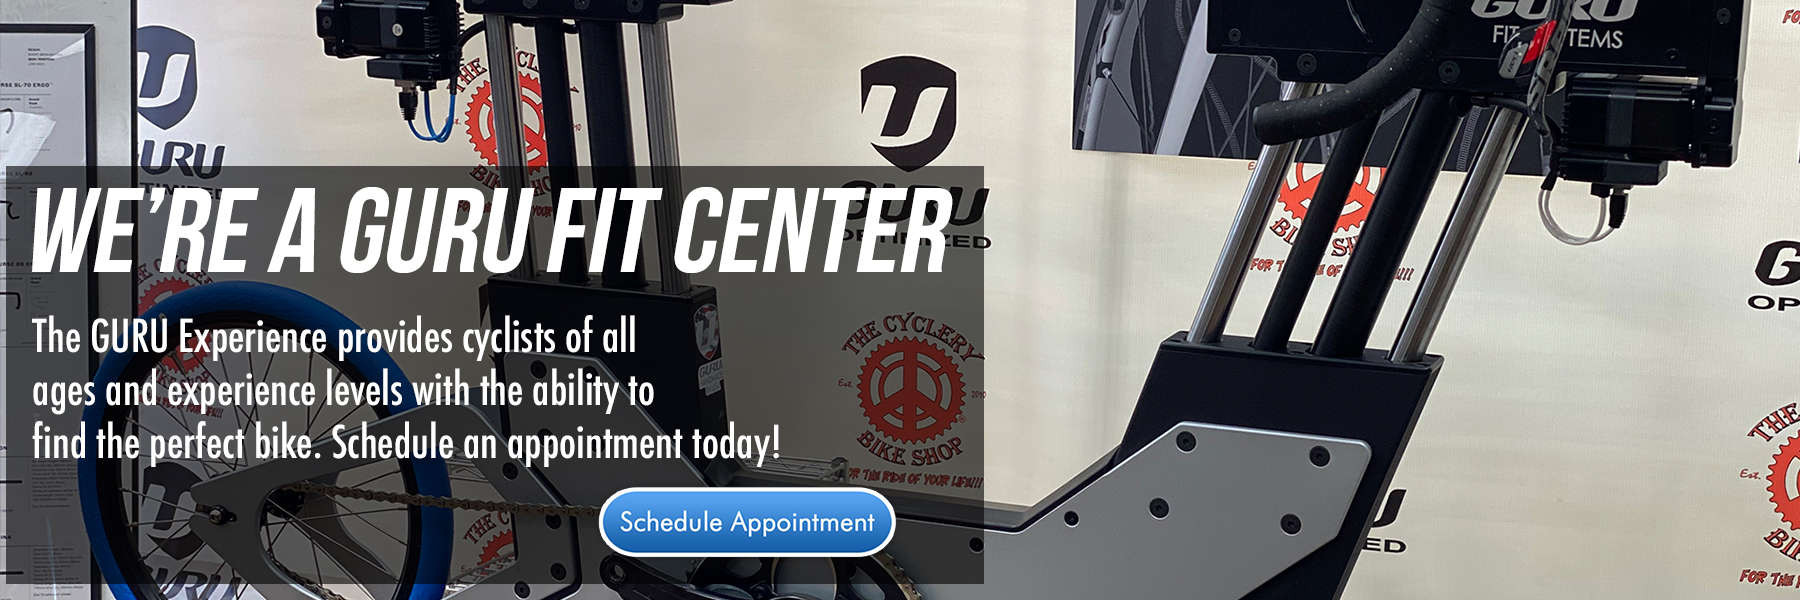 We are a GURU Fit Center - Schedule Your Appointment Now